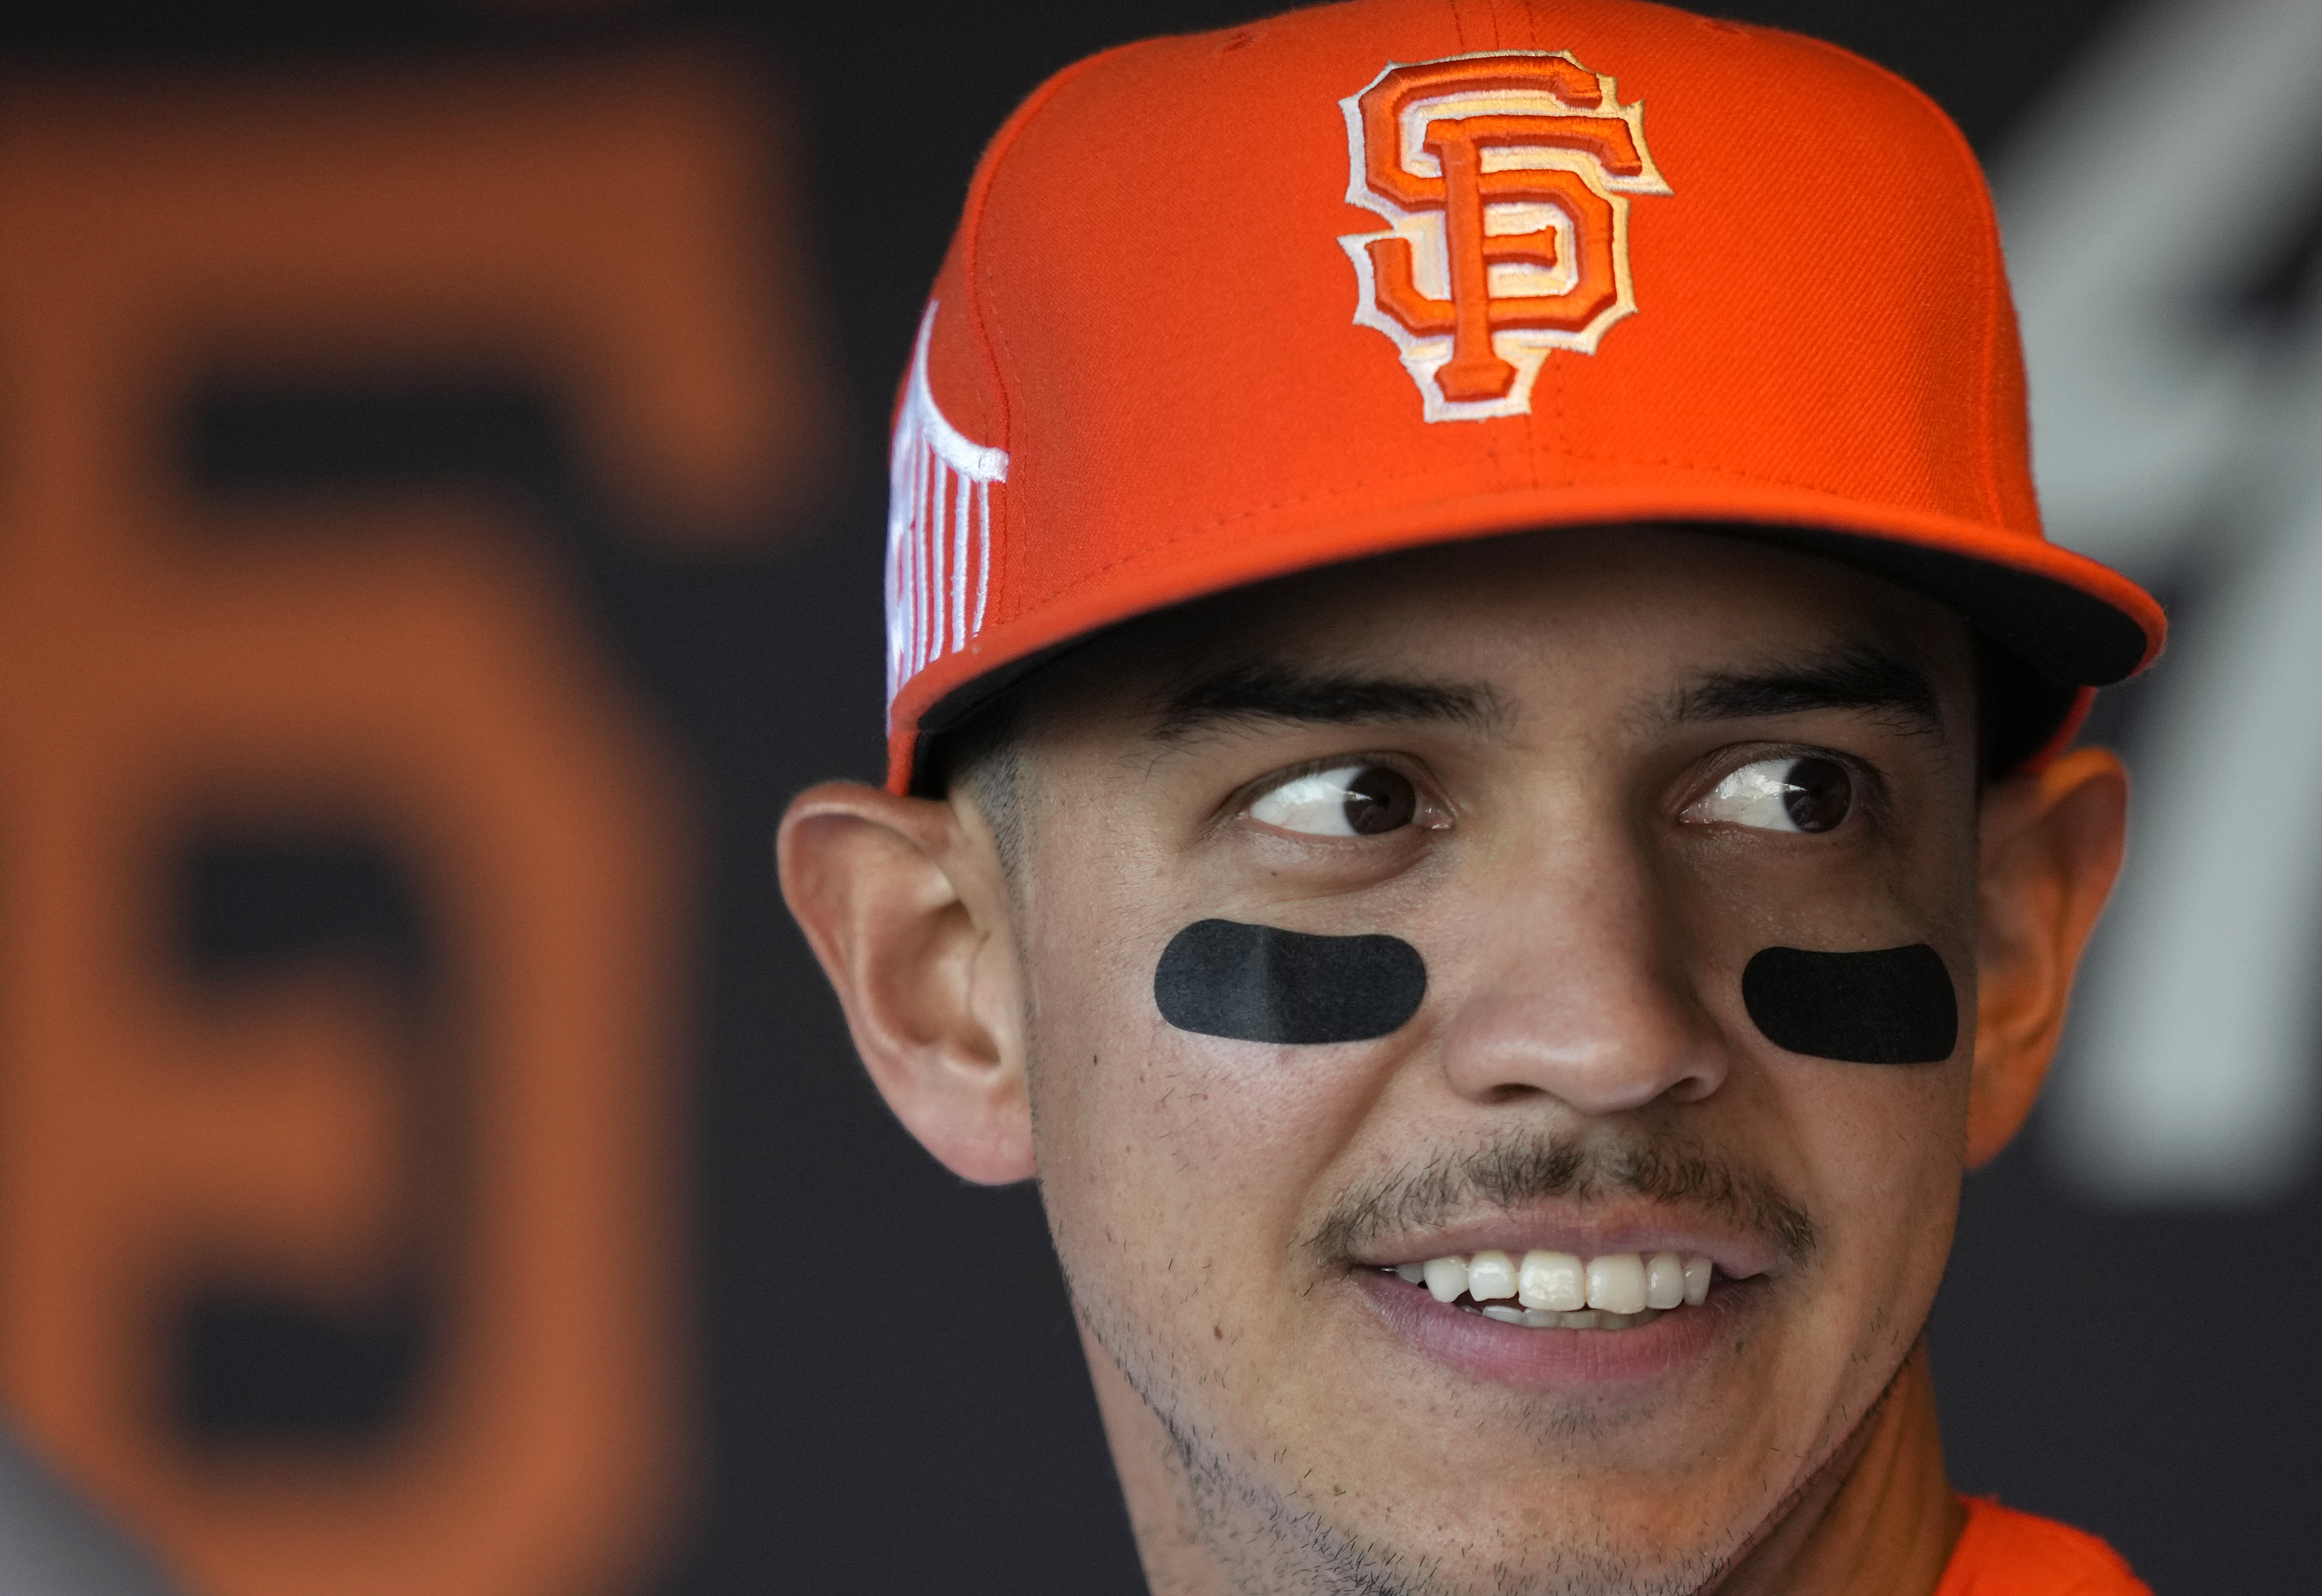 Mauricio Dubón smiling in a Giants hat